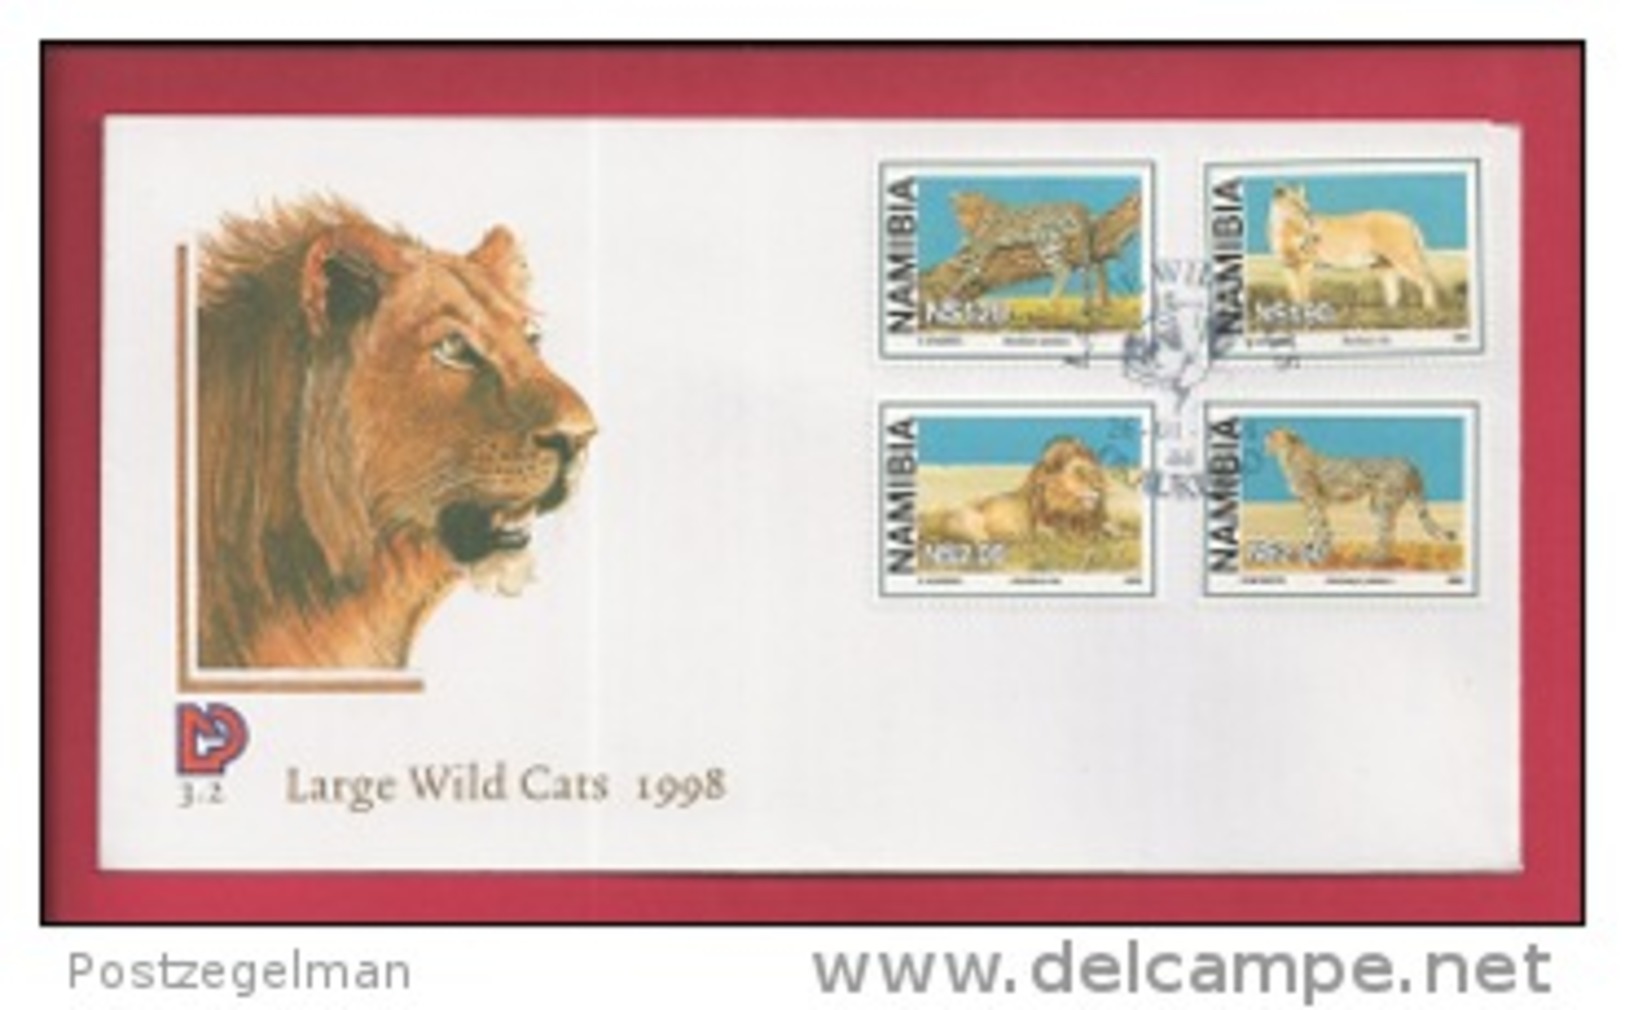 NAMIBIA, 1998, Mint FDC 3.2, Large Wild Cats, Stampnr(s). SACC 234-237, F3608 - Namibia (1990- ...)